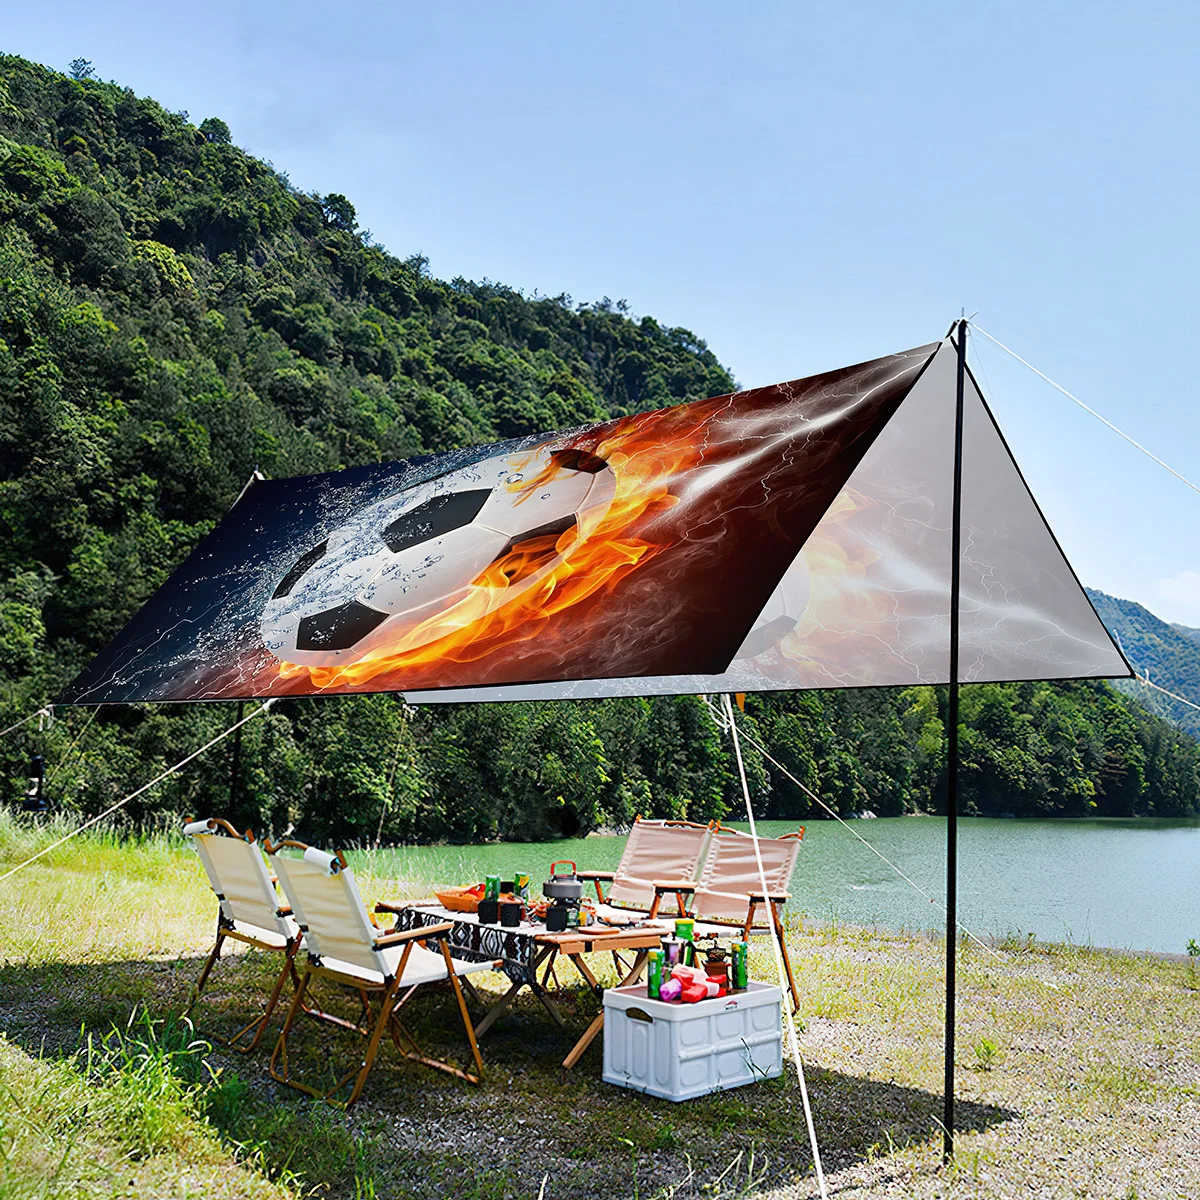 

Lightweight Shade Canopy For Family,Football Portable and UV-resistant Waterproof Machine Washable Oxford Tent For Park,Beach